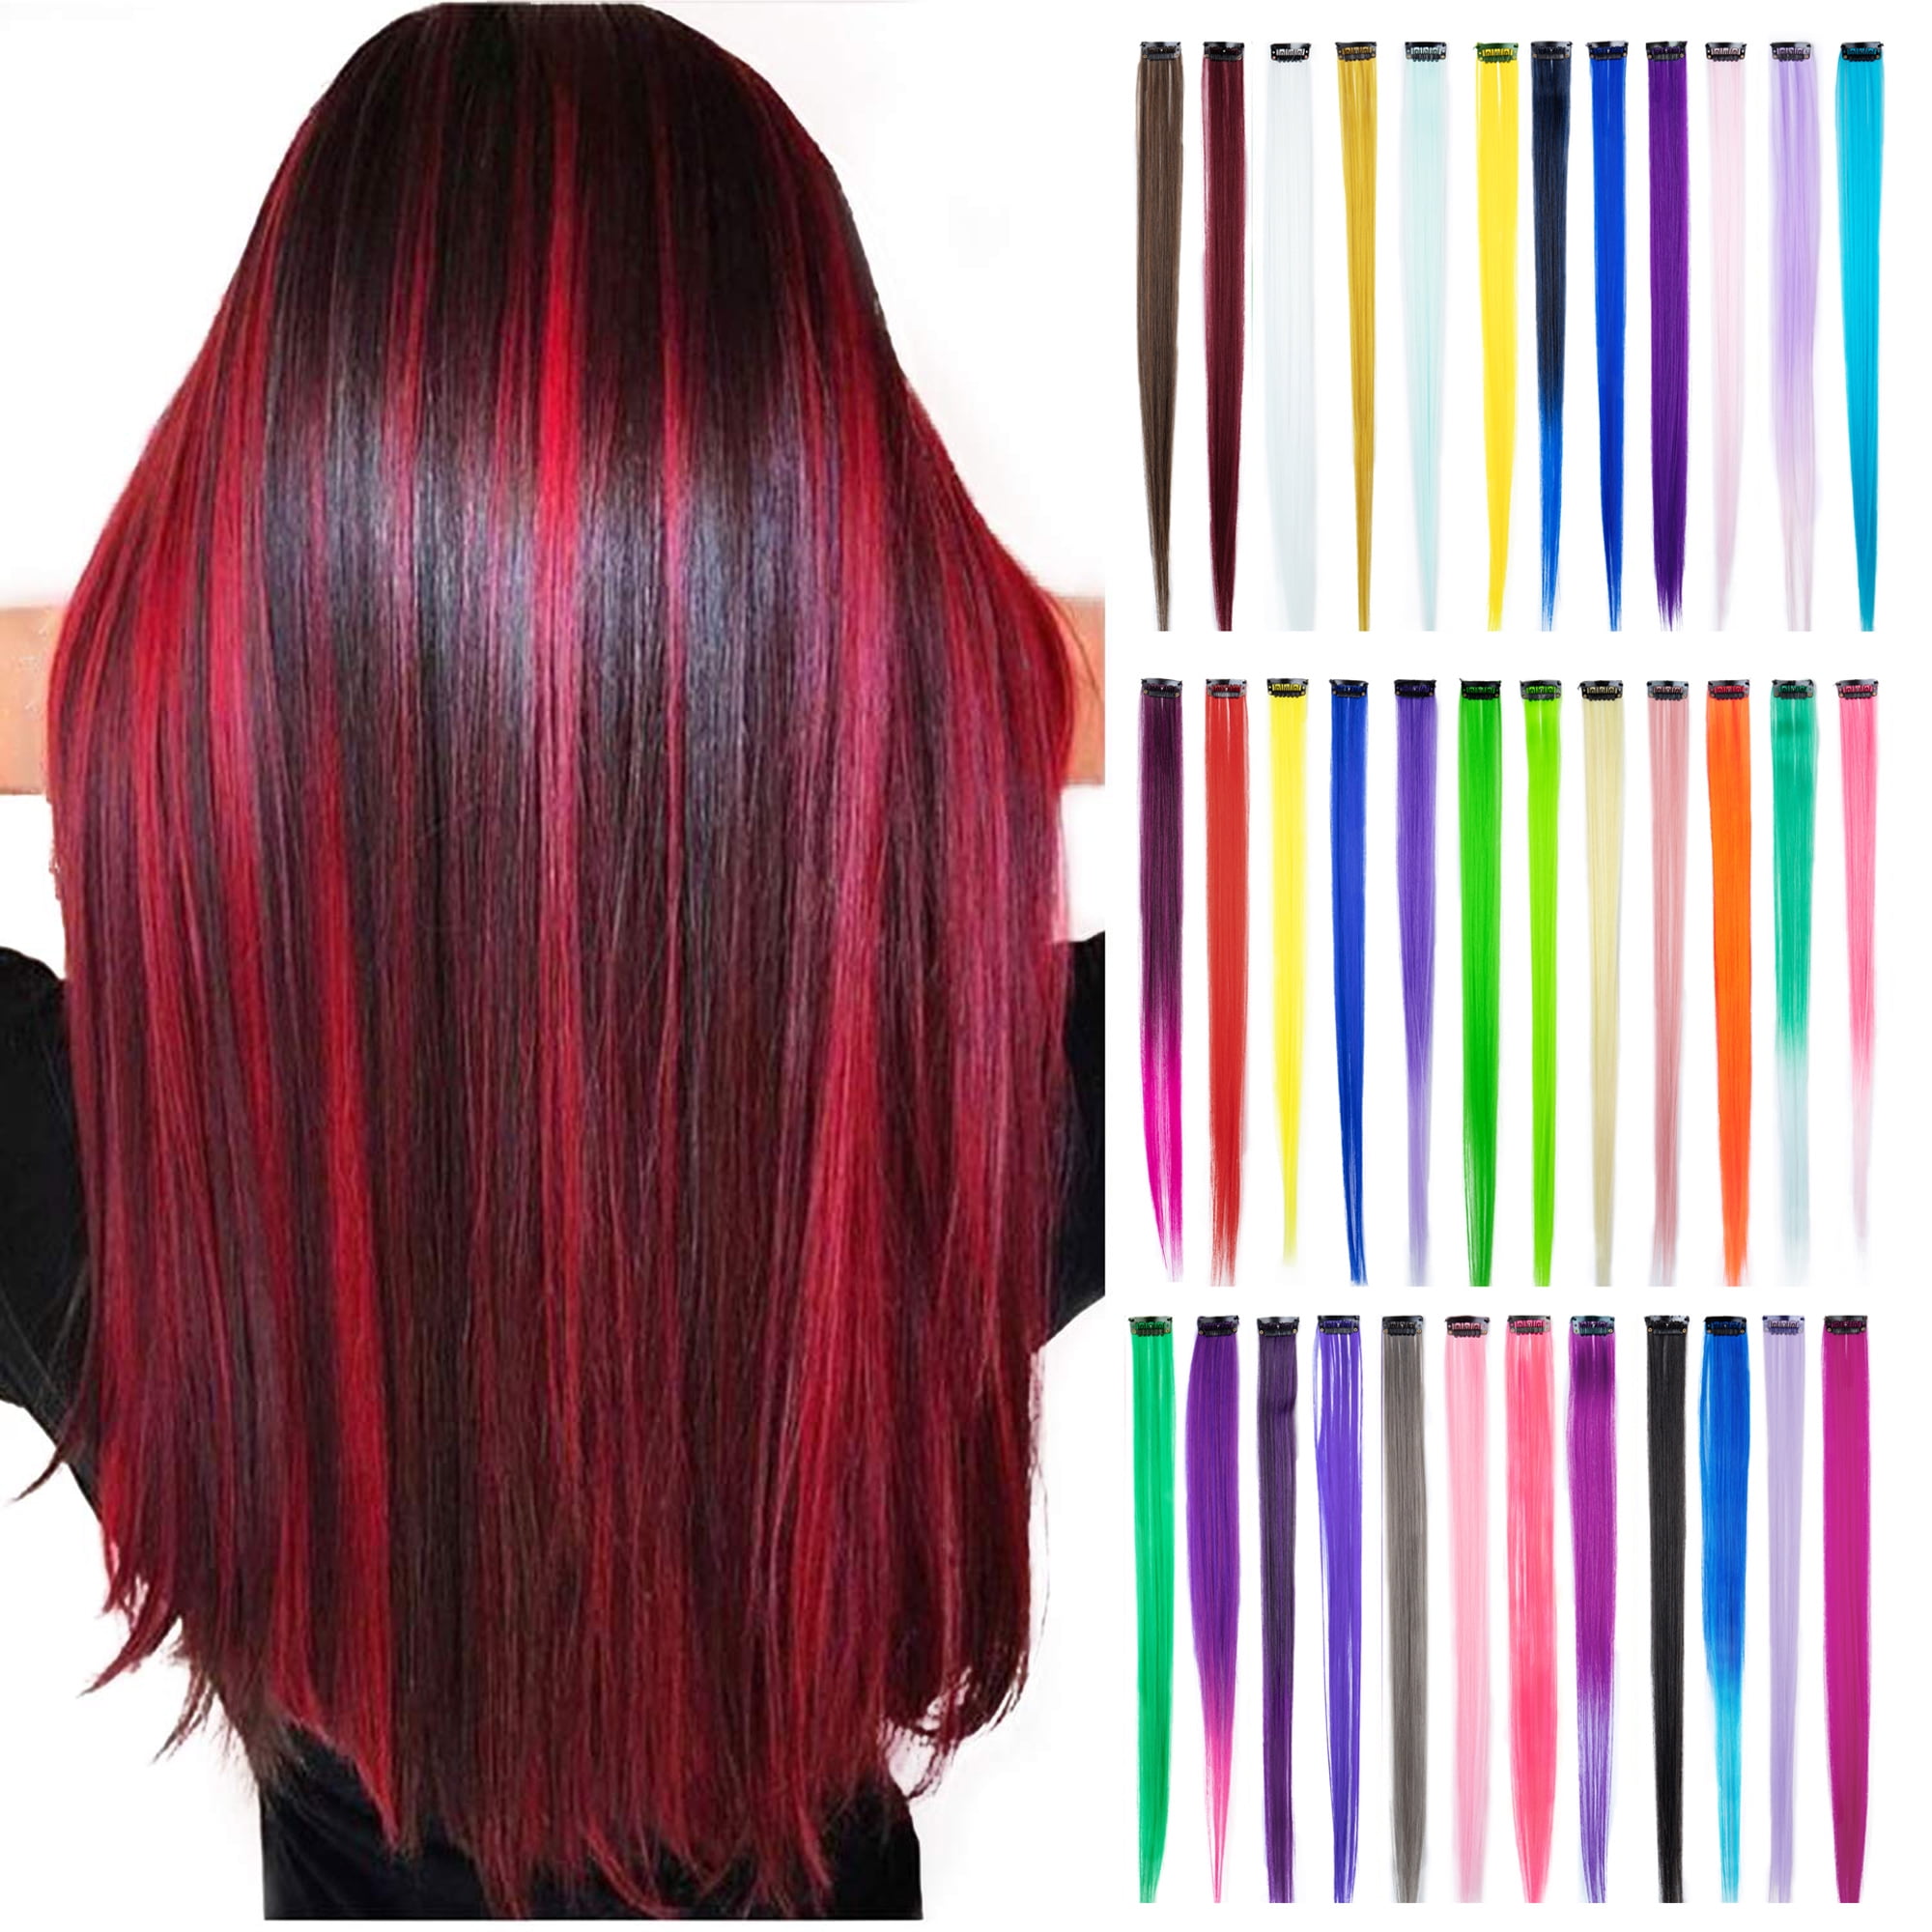 Colored Clip in Hair Extensions, Colorful Straight Long Hair Extensions  Party Highlights Clip in Hairpiece for Kids Girls,36 Pcs (27 Pure Color & 9  Gradient Colors) 22 Inch 